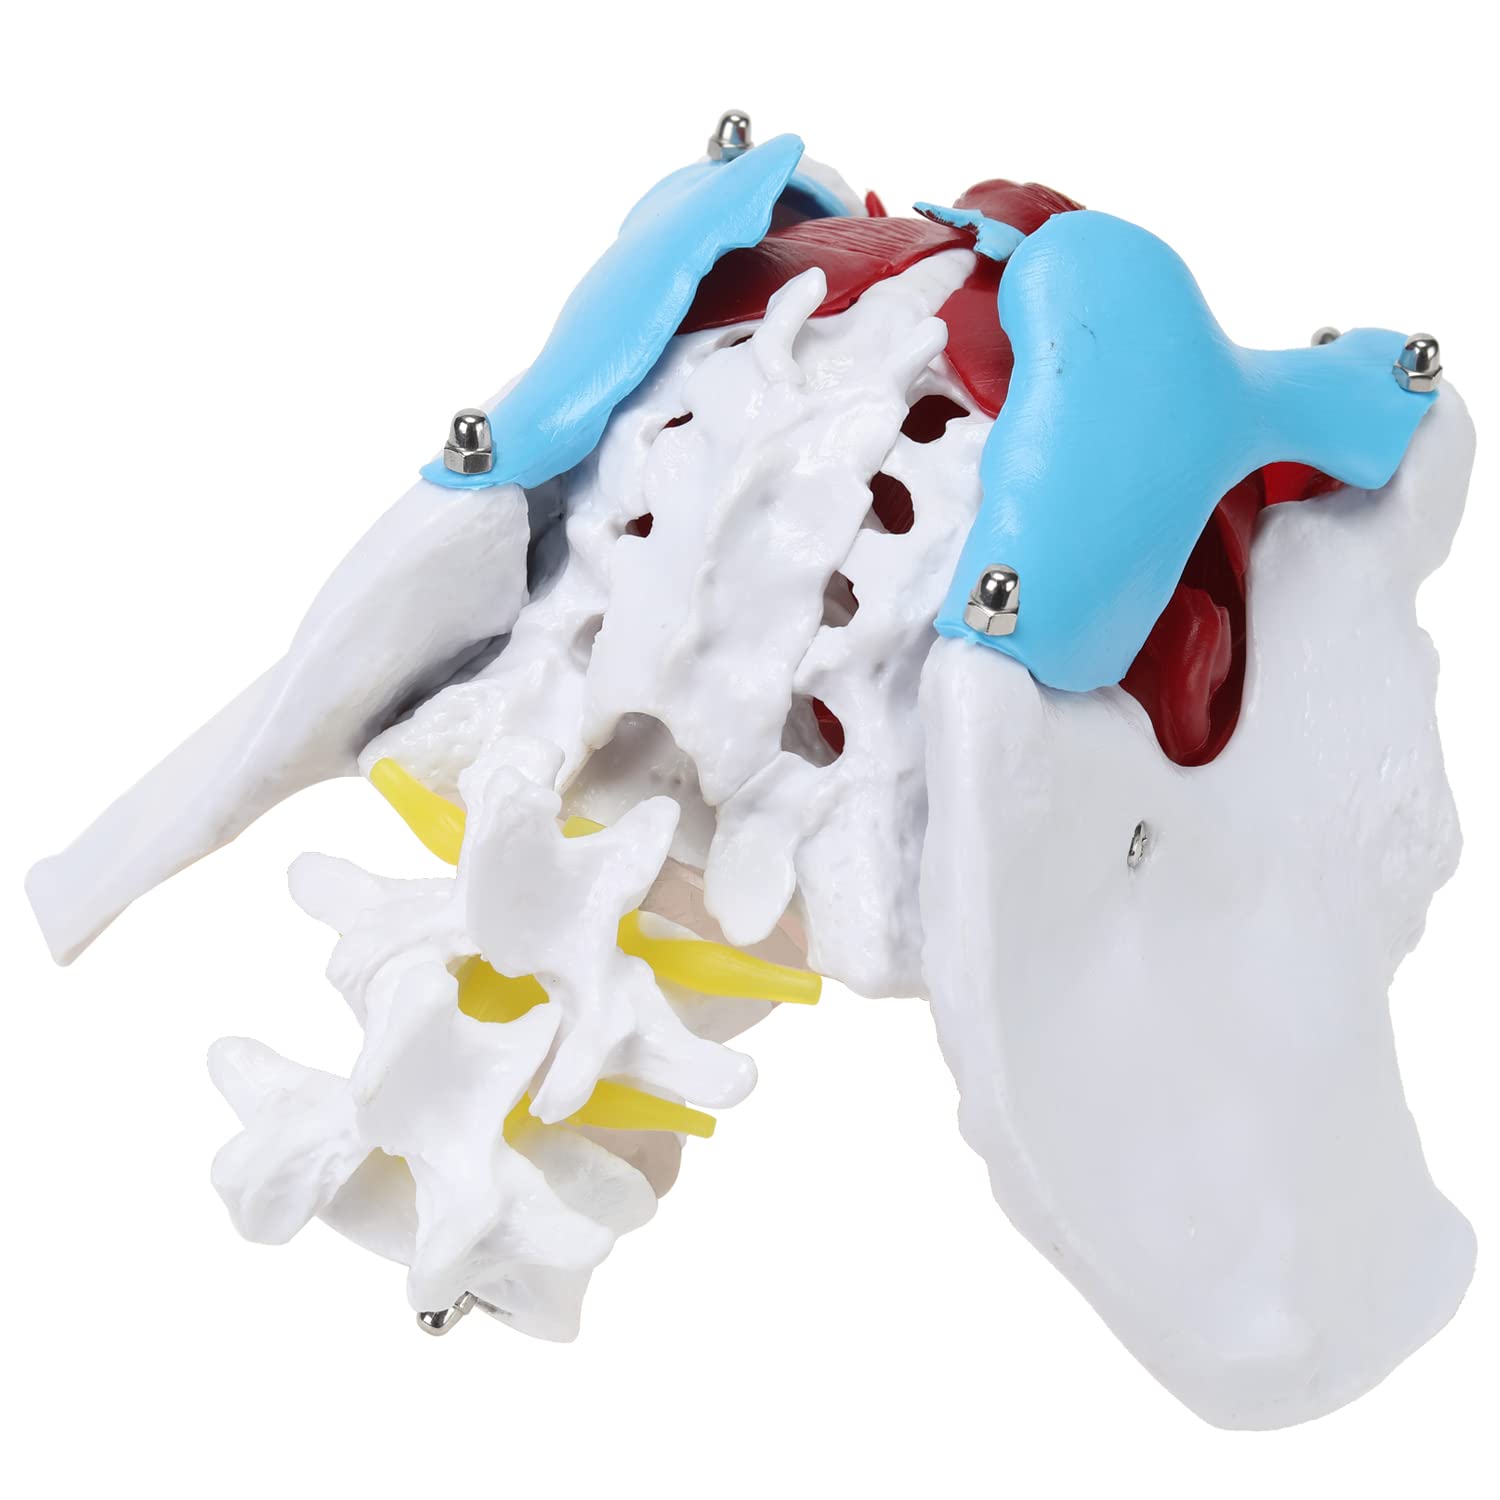 RONTEN Female Pelvis Model with Organs Pelvic Floor Muscles and Reproductive Organs and Removable Organs DISPLAY